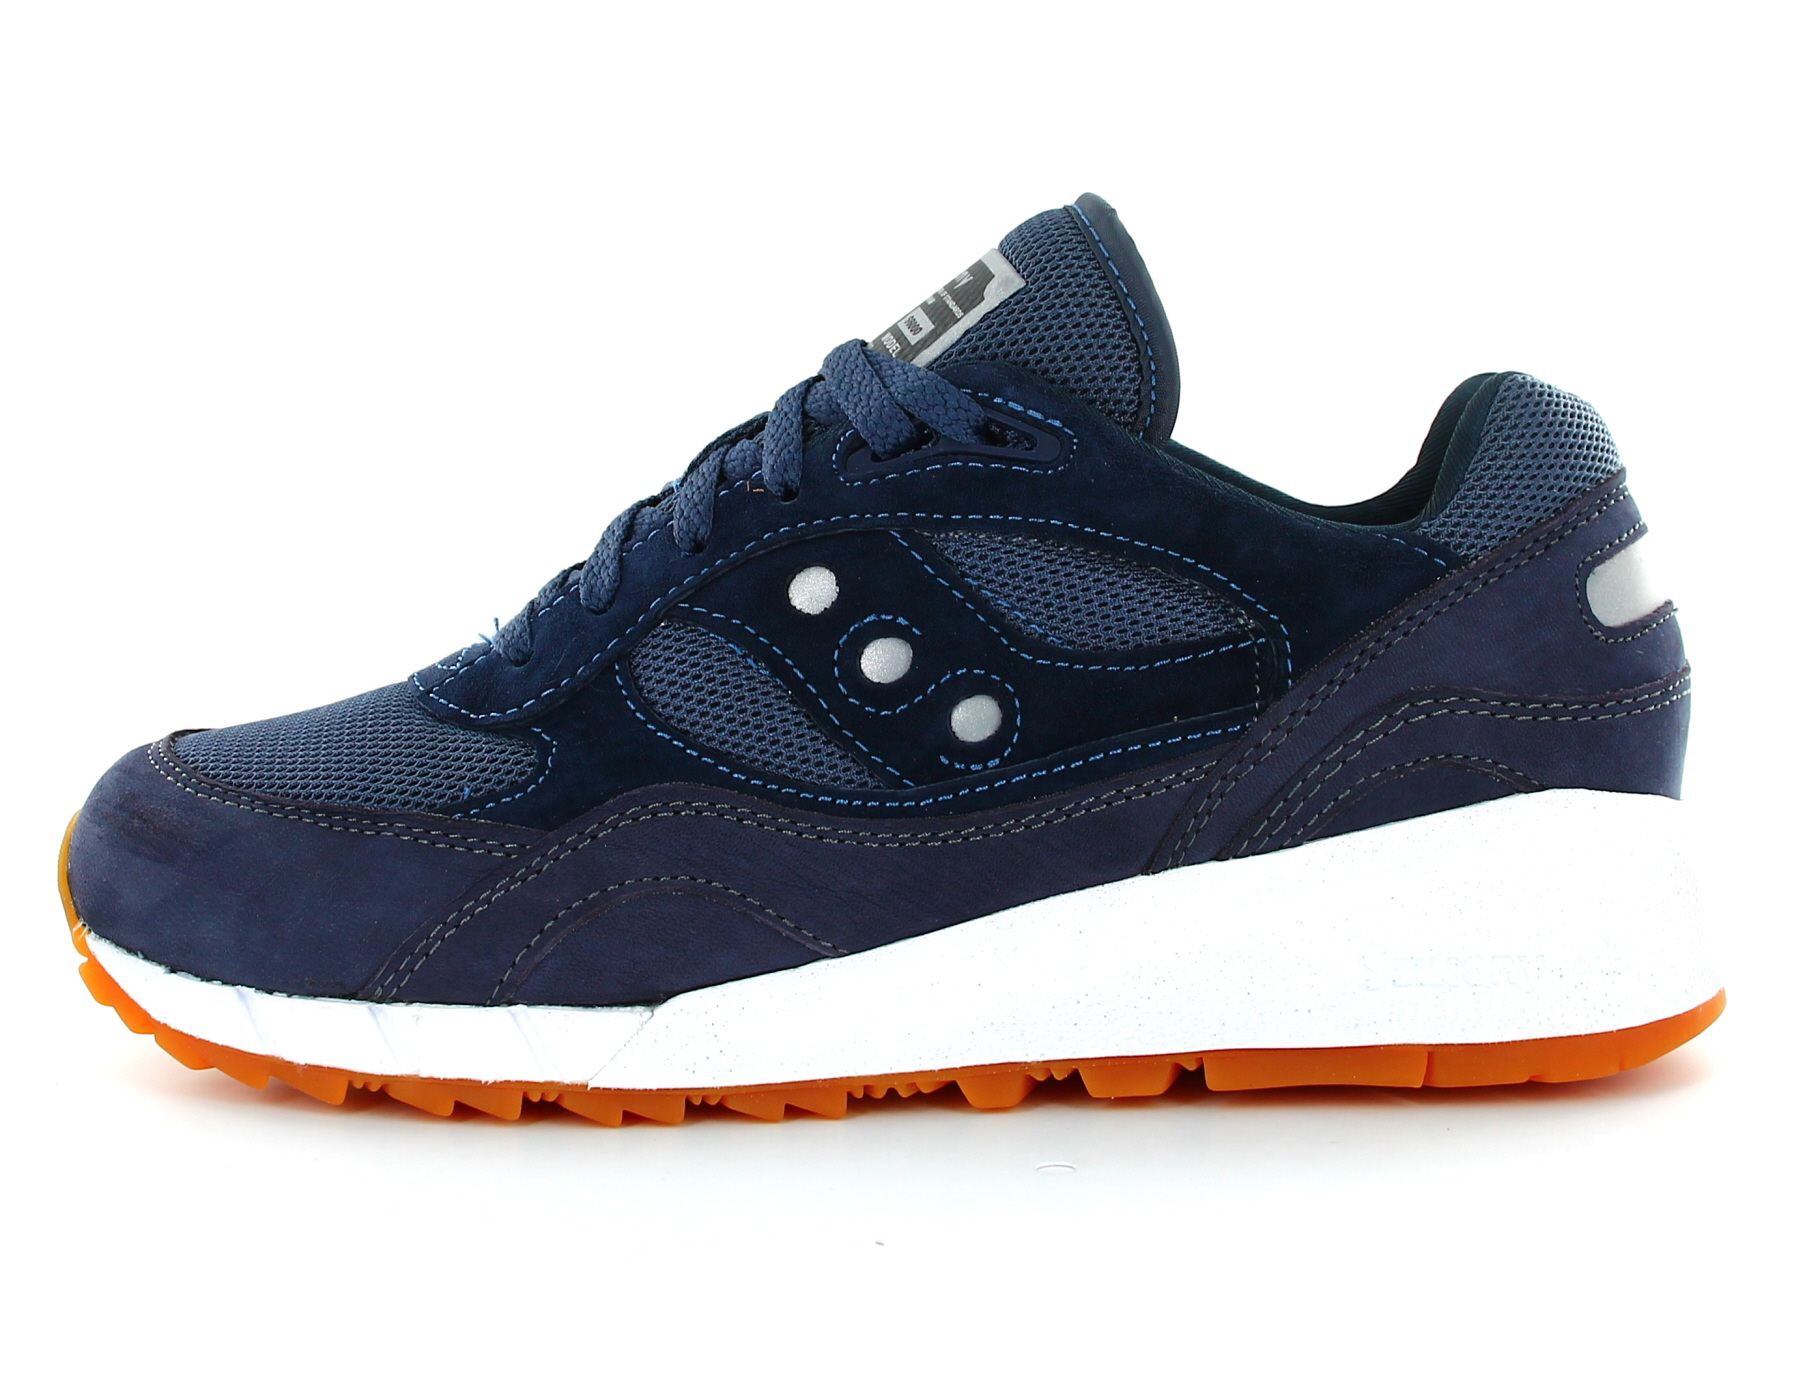 saucony shadow 6000 grey pack